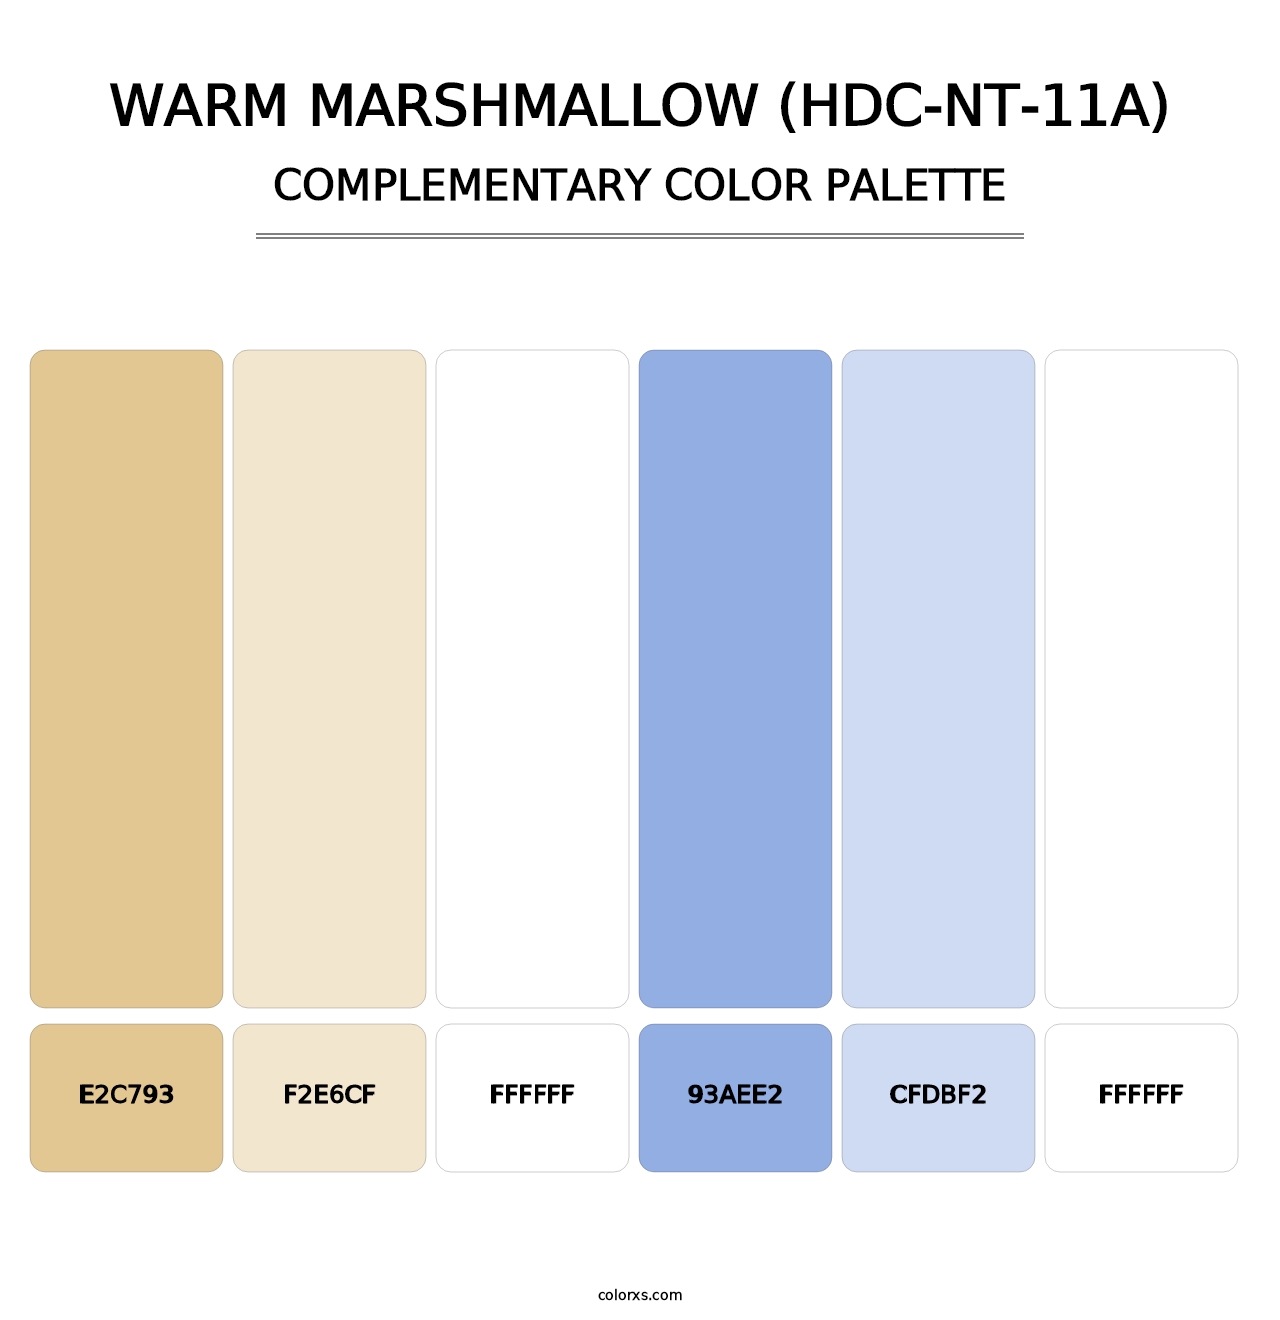 Warm Marshmallow (HDC-NT-11A) - Complementary Color Palette